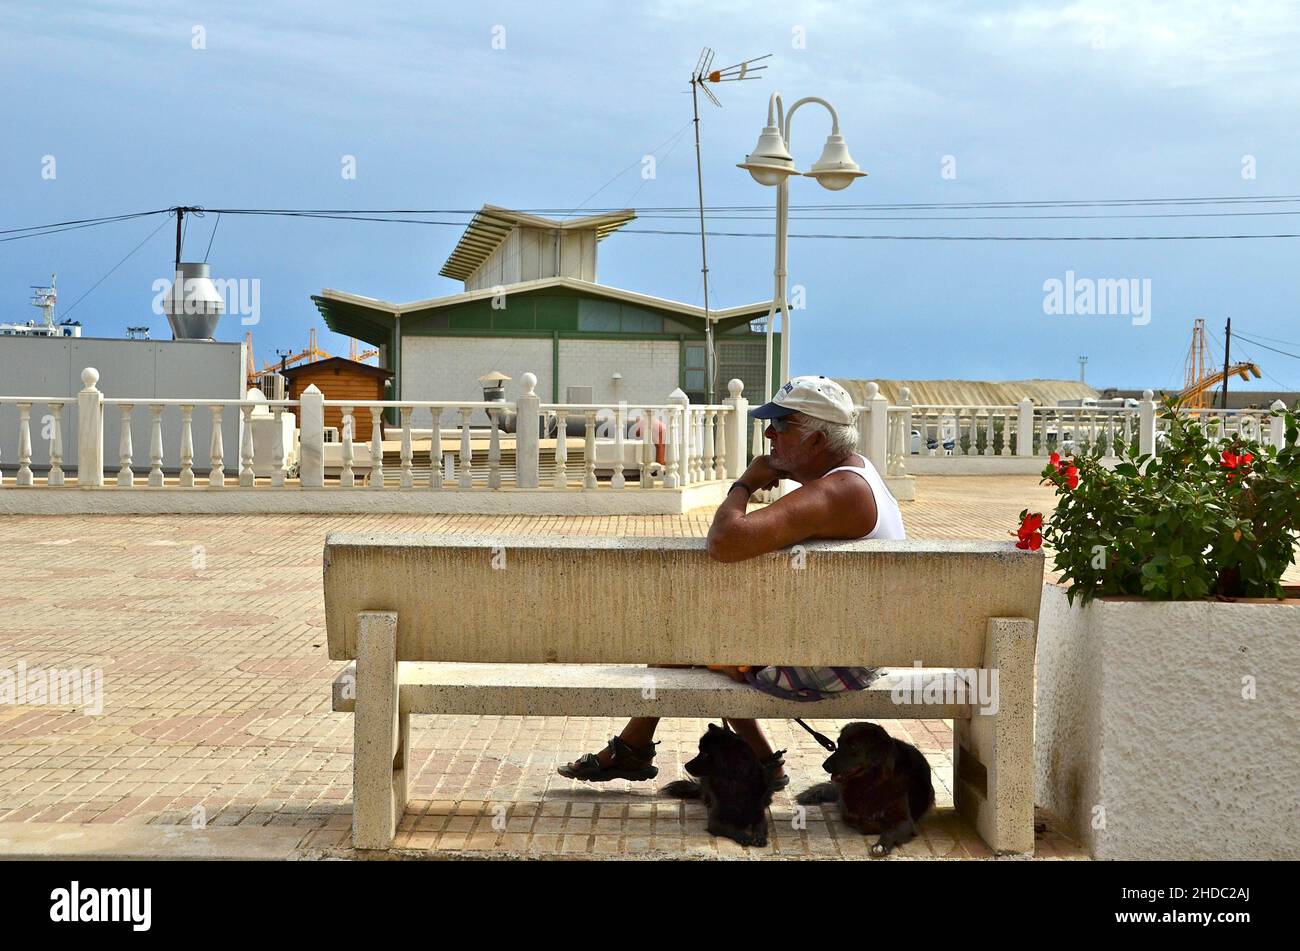 Man sitting on park bench with two dogs, waterfront, Villaricos, Andalucia, Spain, Europe Stock Photo